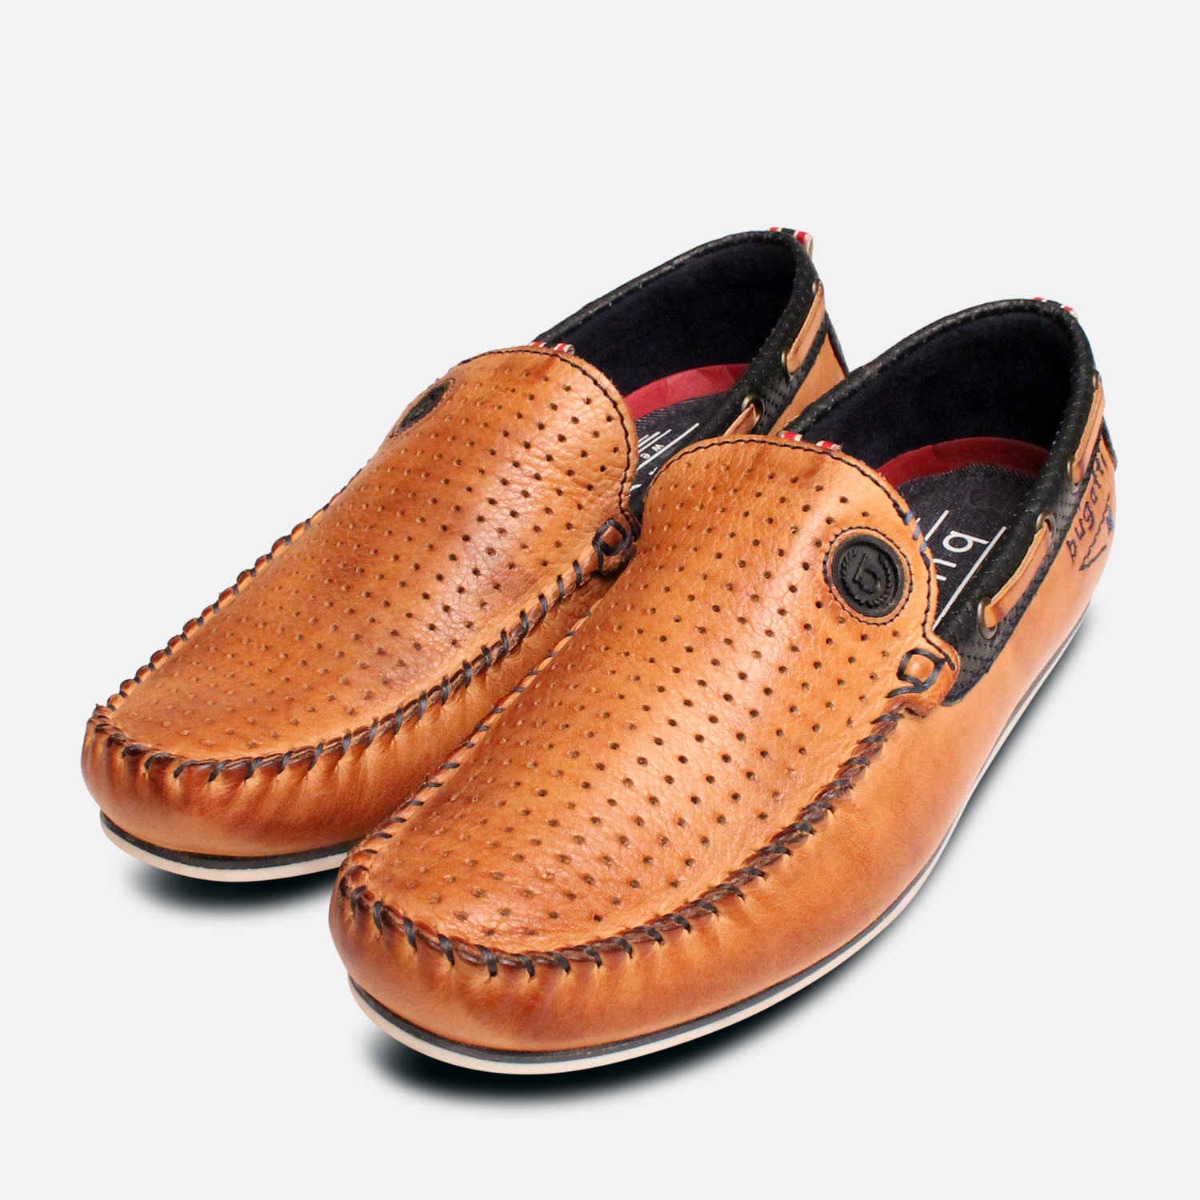 perforated loafers